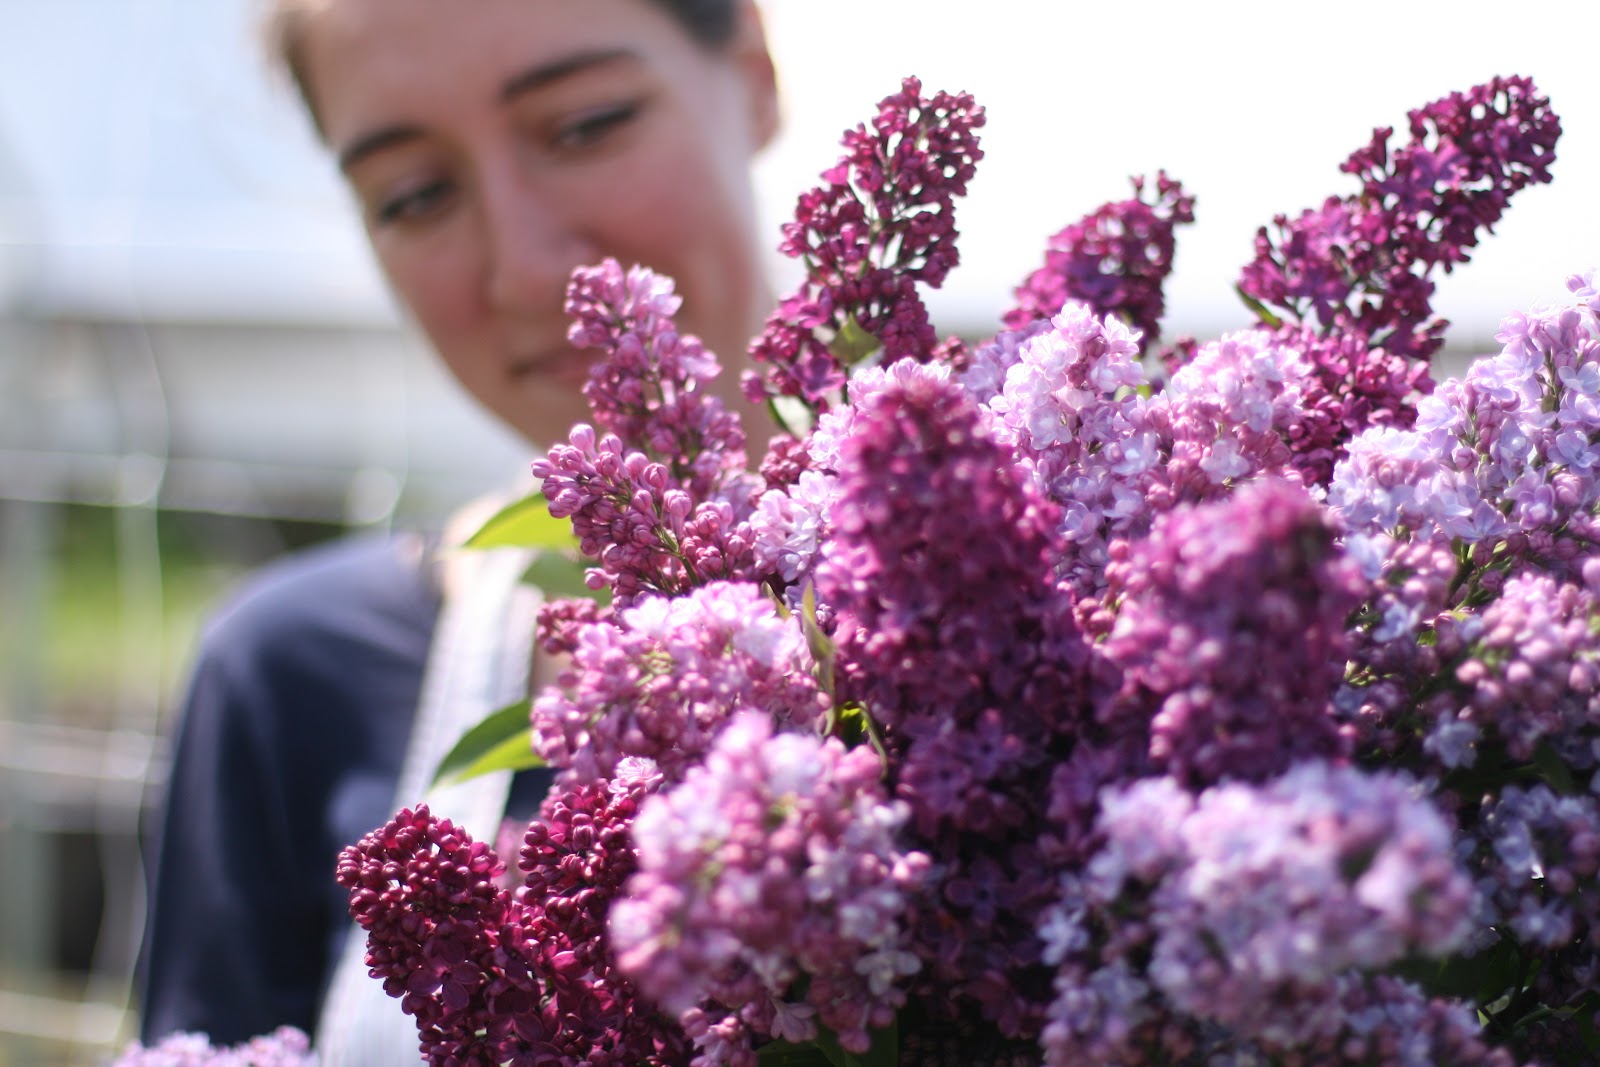 Erin Benzakein with lilac blooms